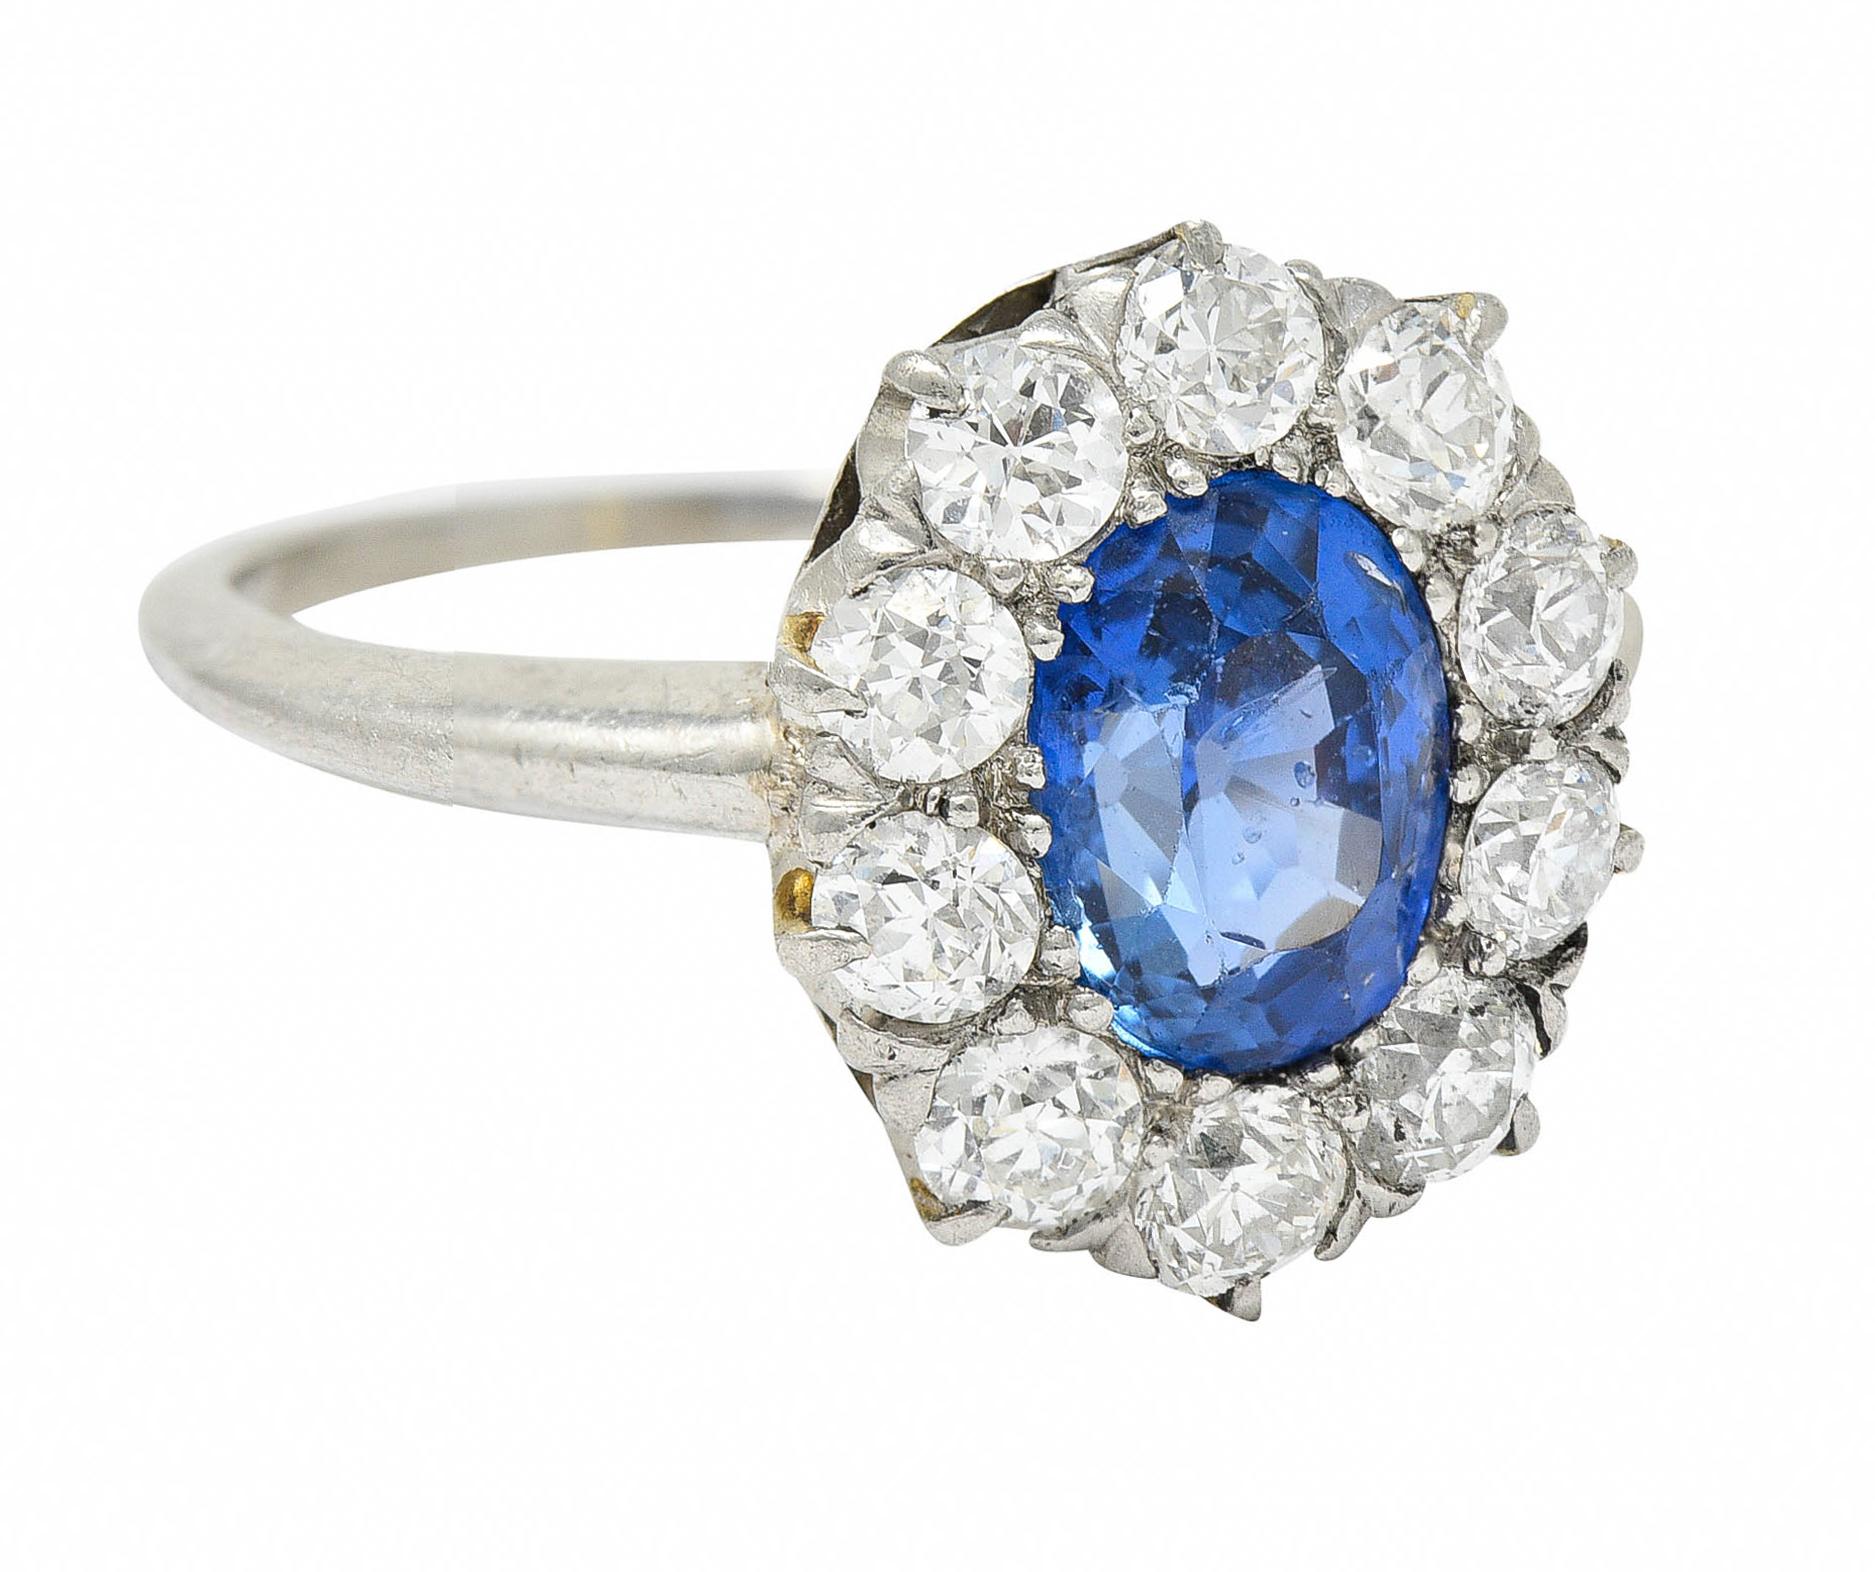 Cluster style ring centers an oval cut Ceylon sapphire weighing approximately 1.70 carats

Saturated violetish blue with no indications of heat - Sri Lankan in origin

Surrounded by old European and transitional cut diamonds

Weighing in total